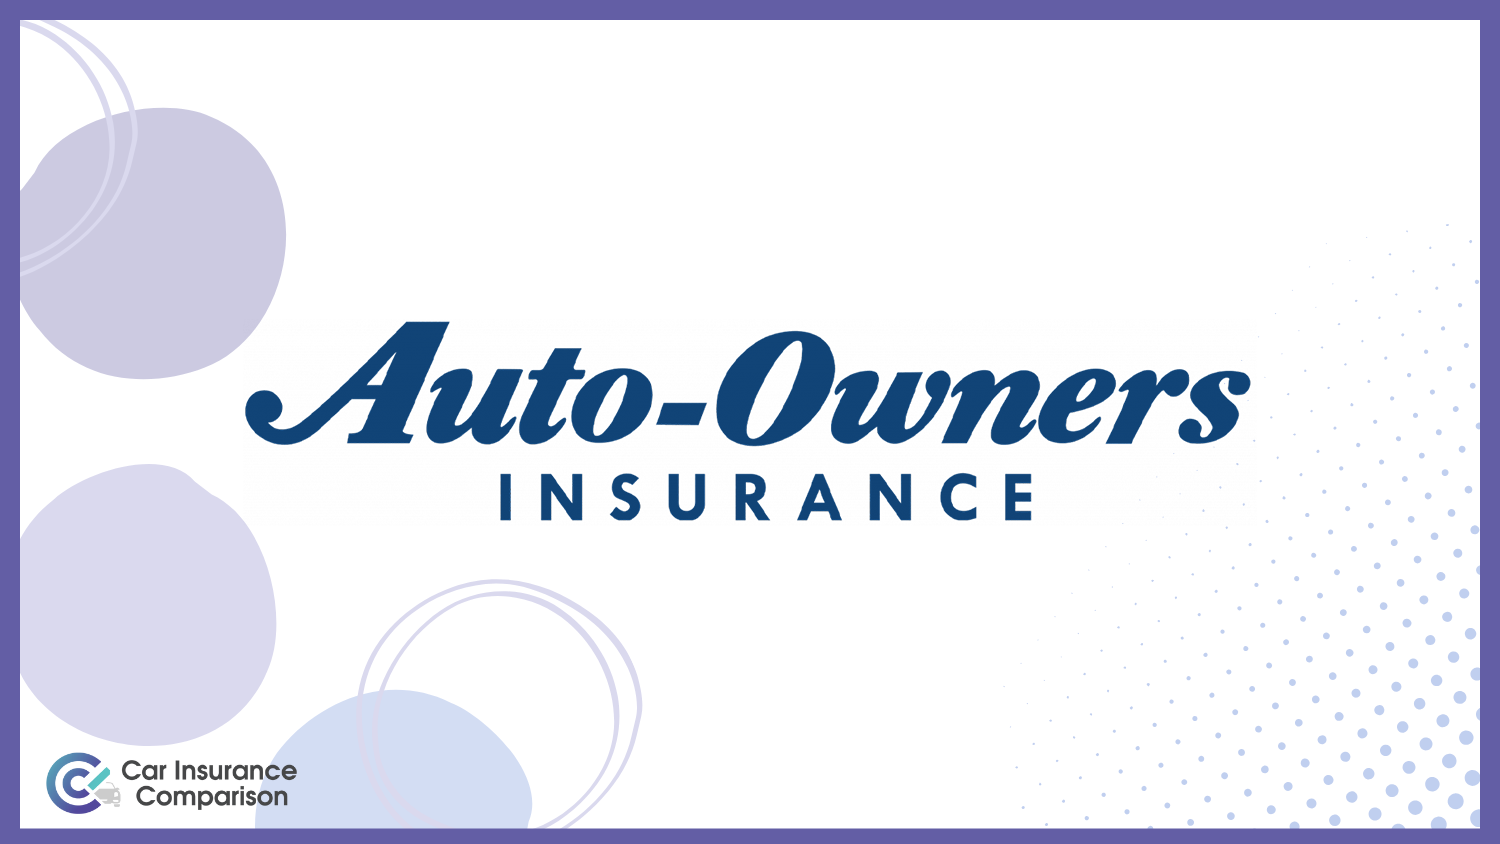 Auto-Owners: Best Low-Mileage Car Insurance